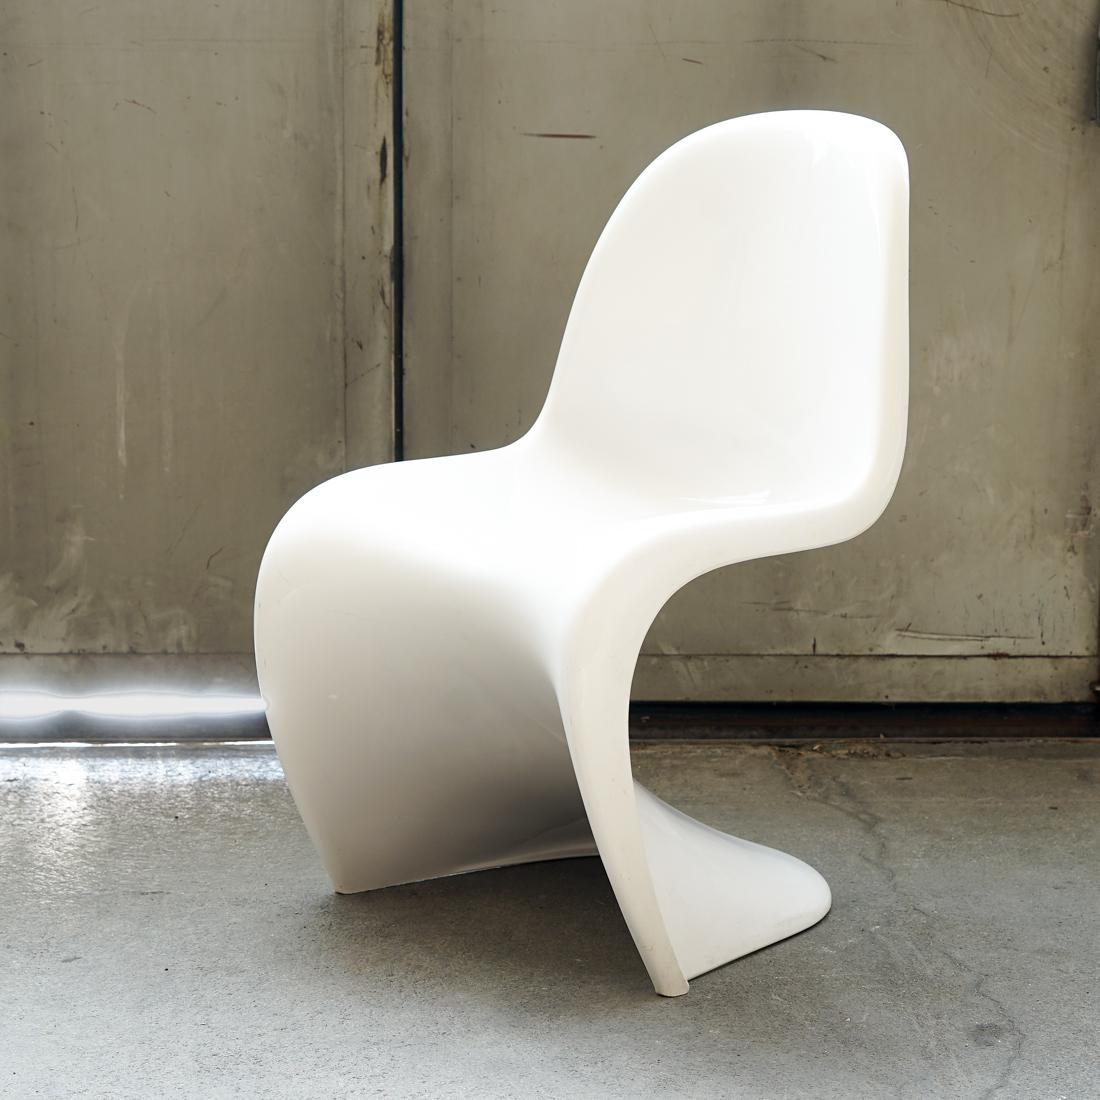 This iconic Panton chair was designed in the 1960s by the Danish designer Verner Panton. Panton's futuristic design of the stacking chair was the first injection molded plastic chair made of only one material and one shape. Due to its ergonomic